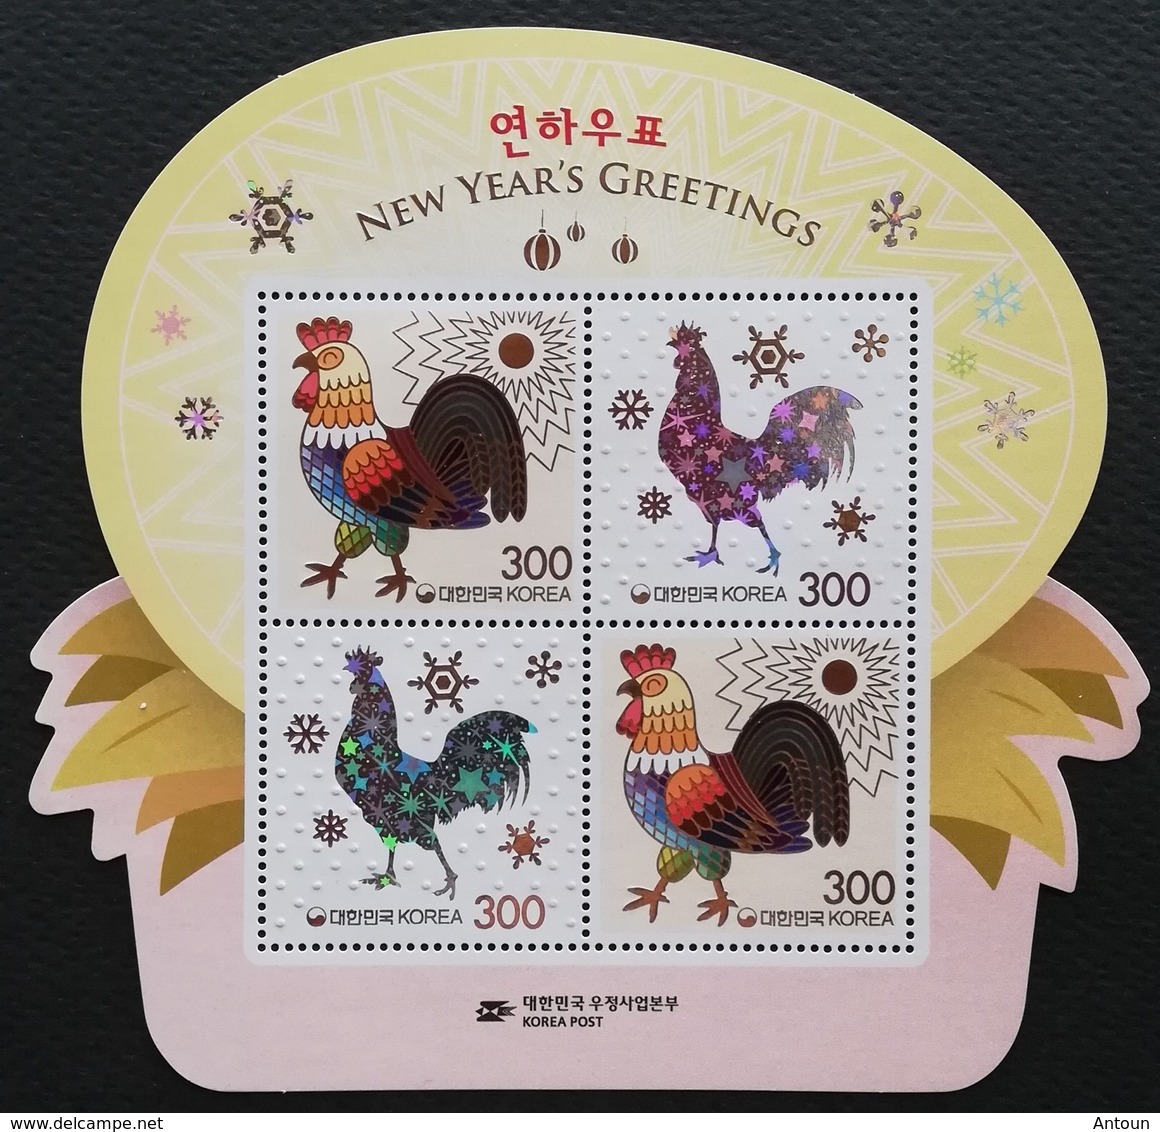 Korea South 2016 New Year"s Greeting S/S   POSTAGE FEE TO BE ADDED ON ALL ITEMS - Korea, South